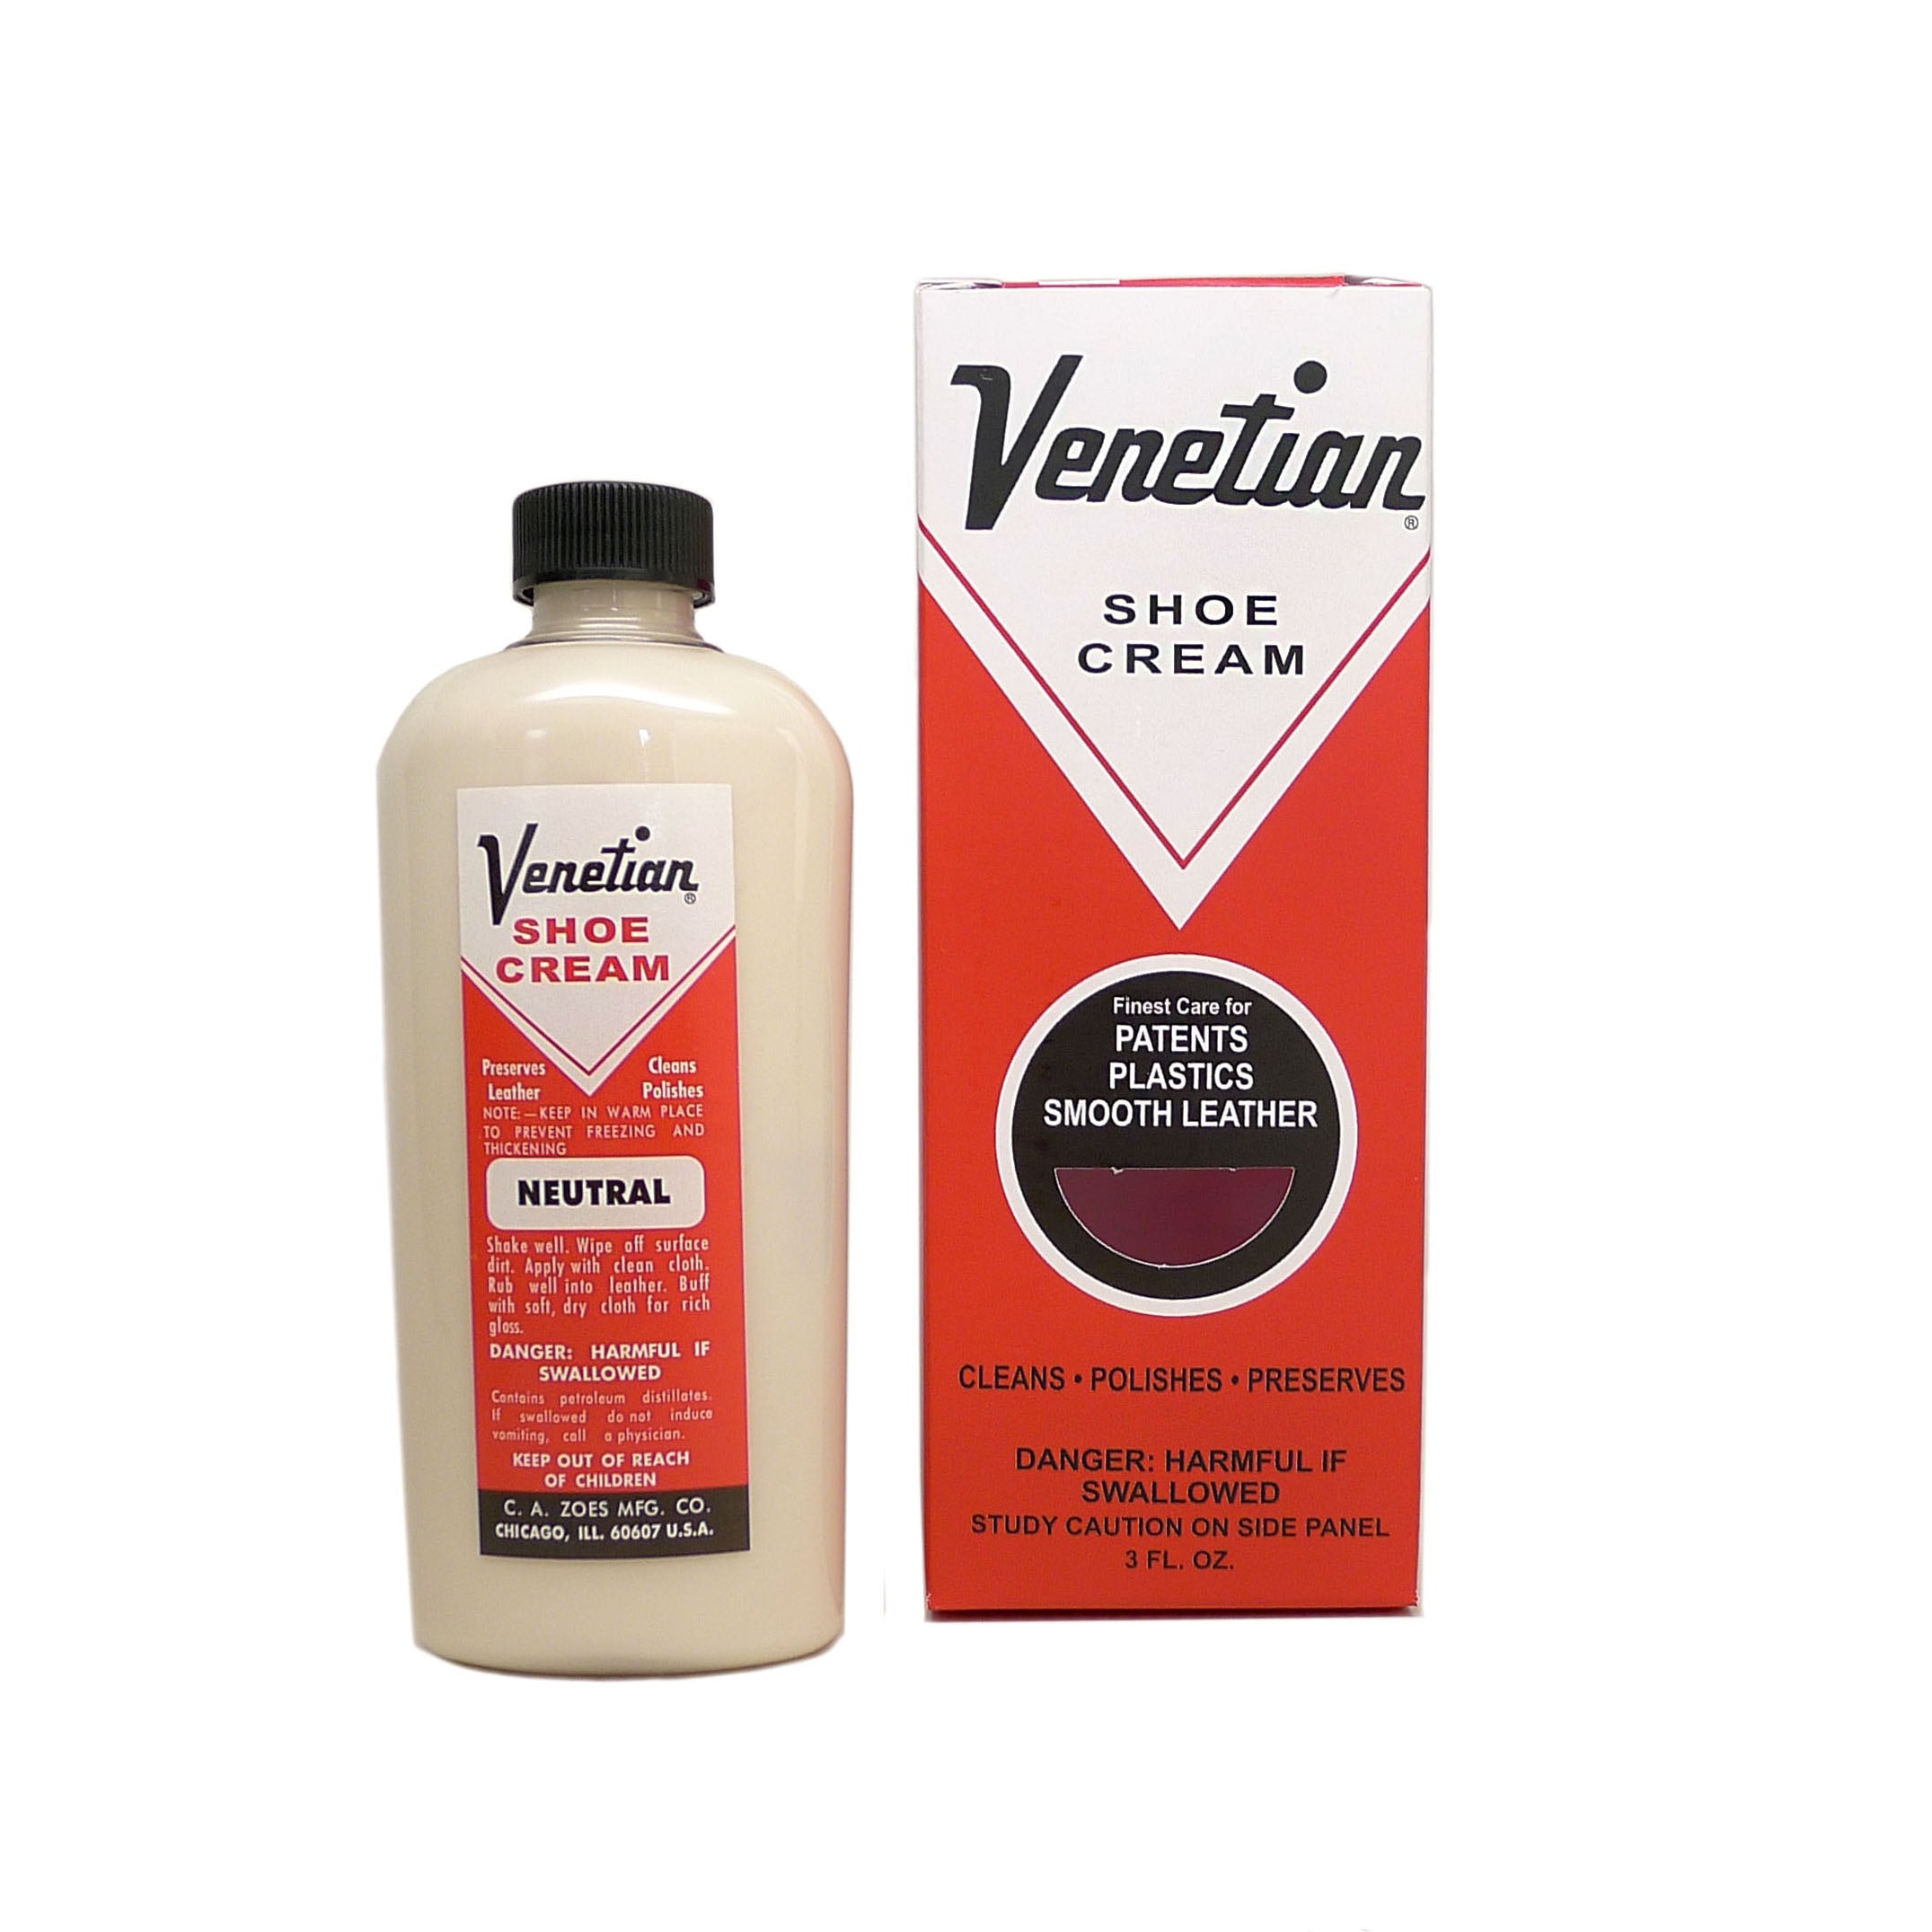 A Venetian Cream in a 3oz Size with a Neutral Color in a Plastic Bottle DaLuca Straps.